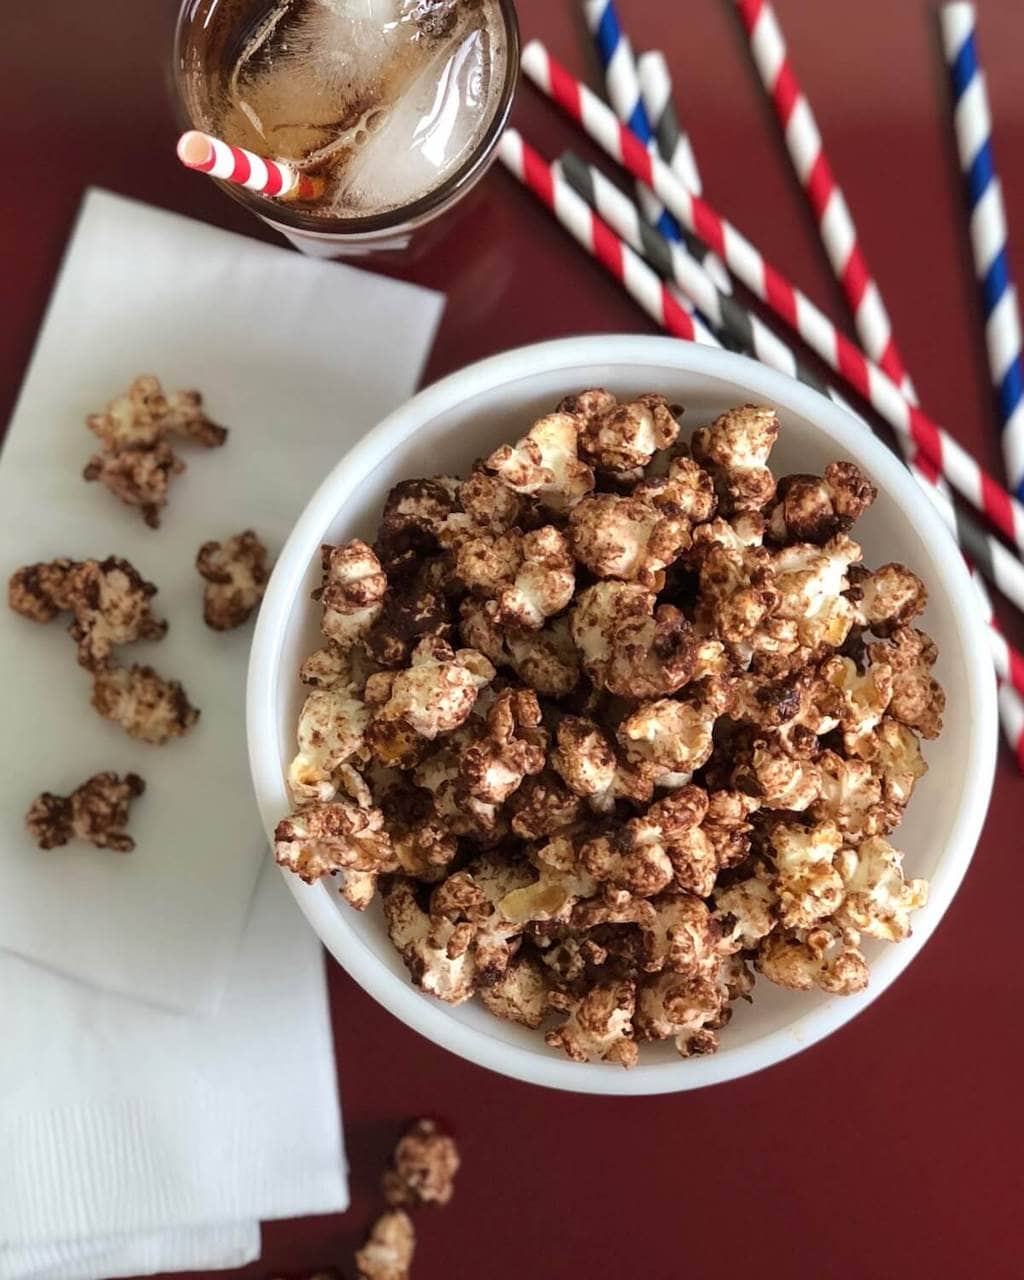 chocolate malt flavored popcorn on a soda shop red table